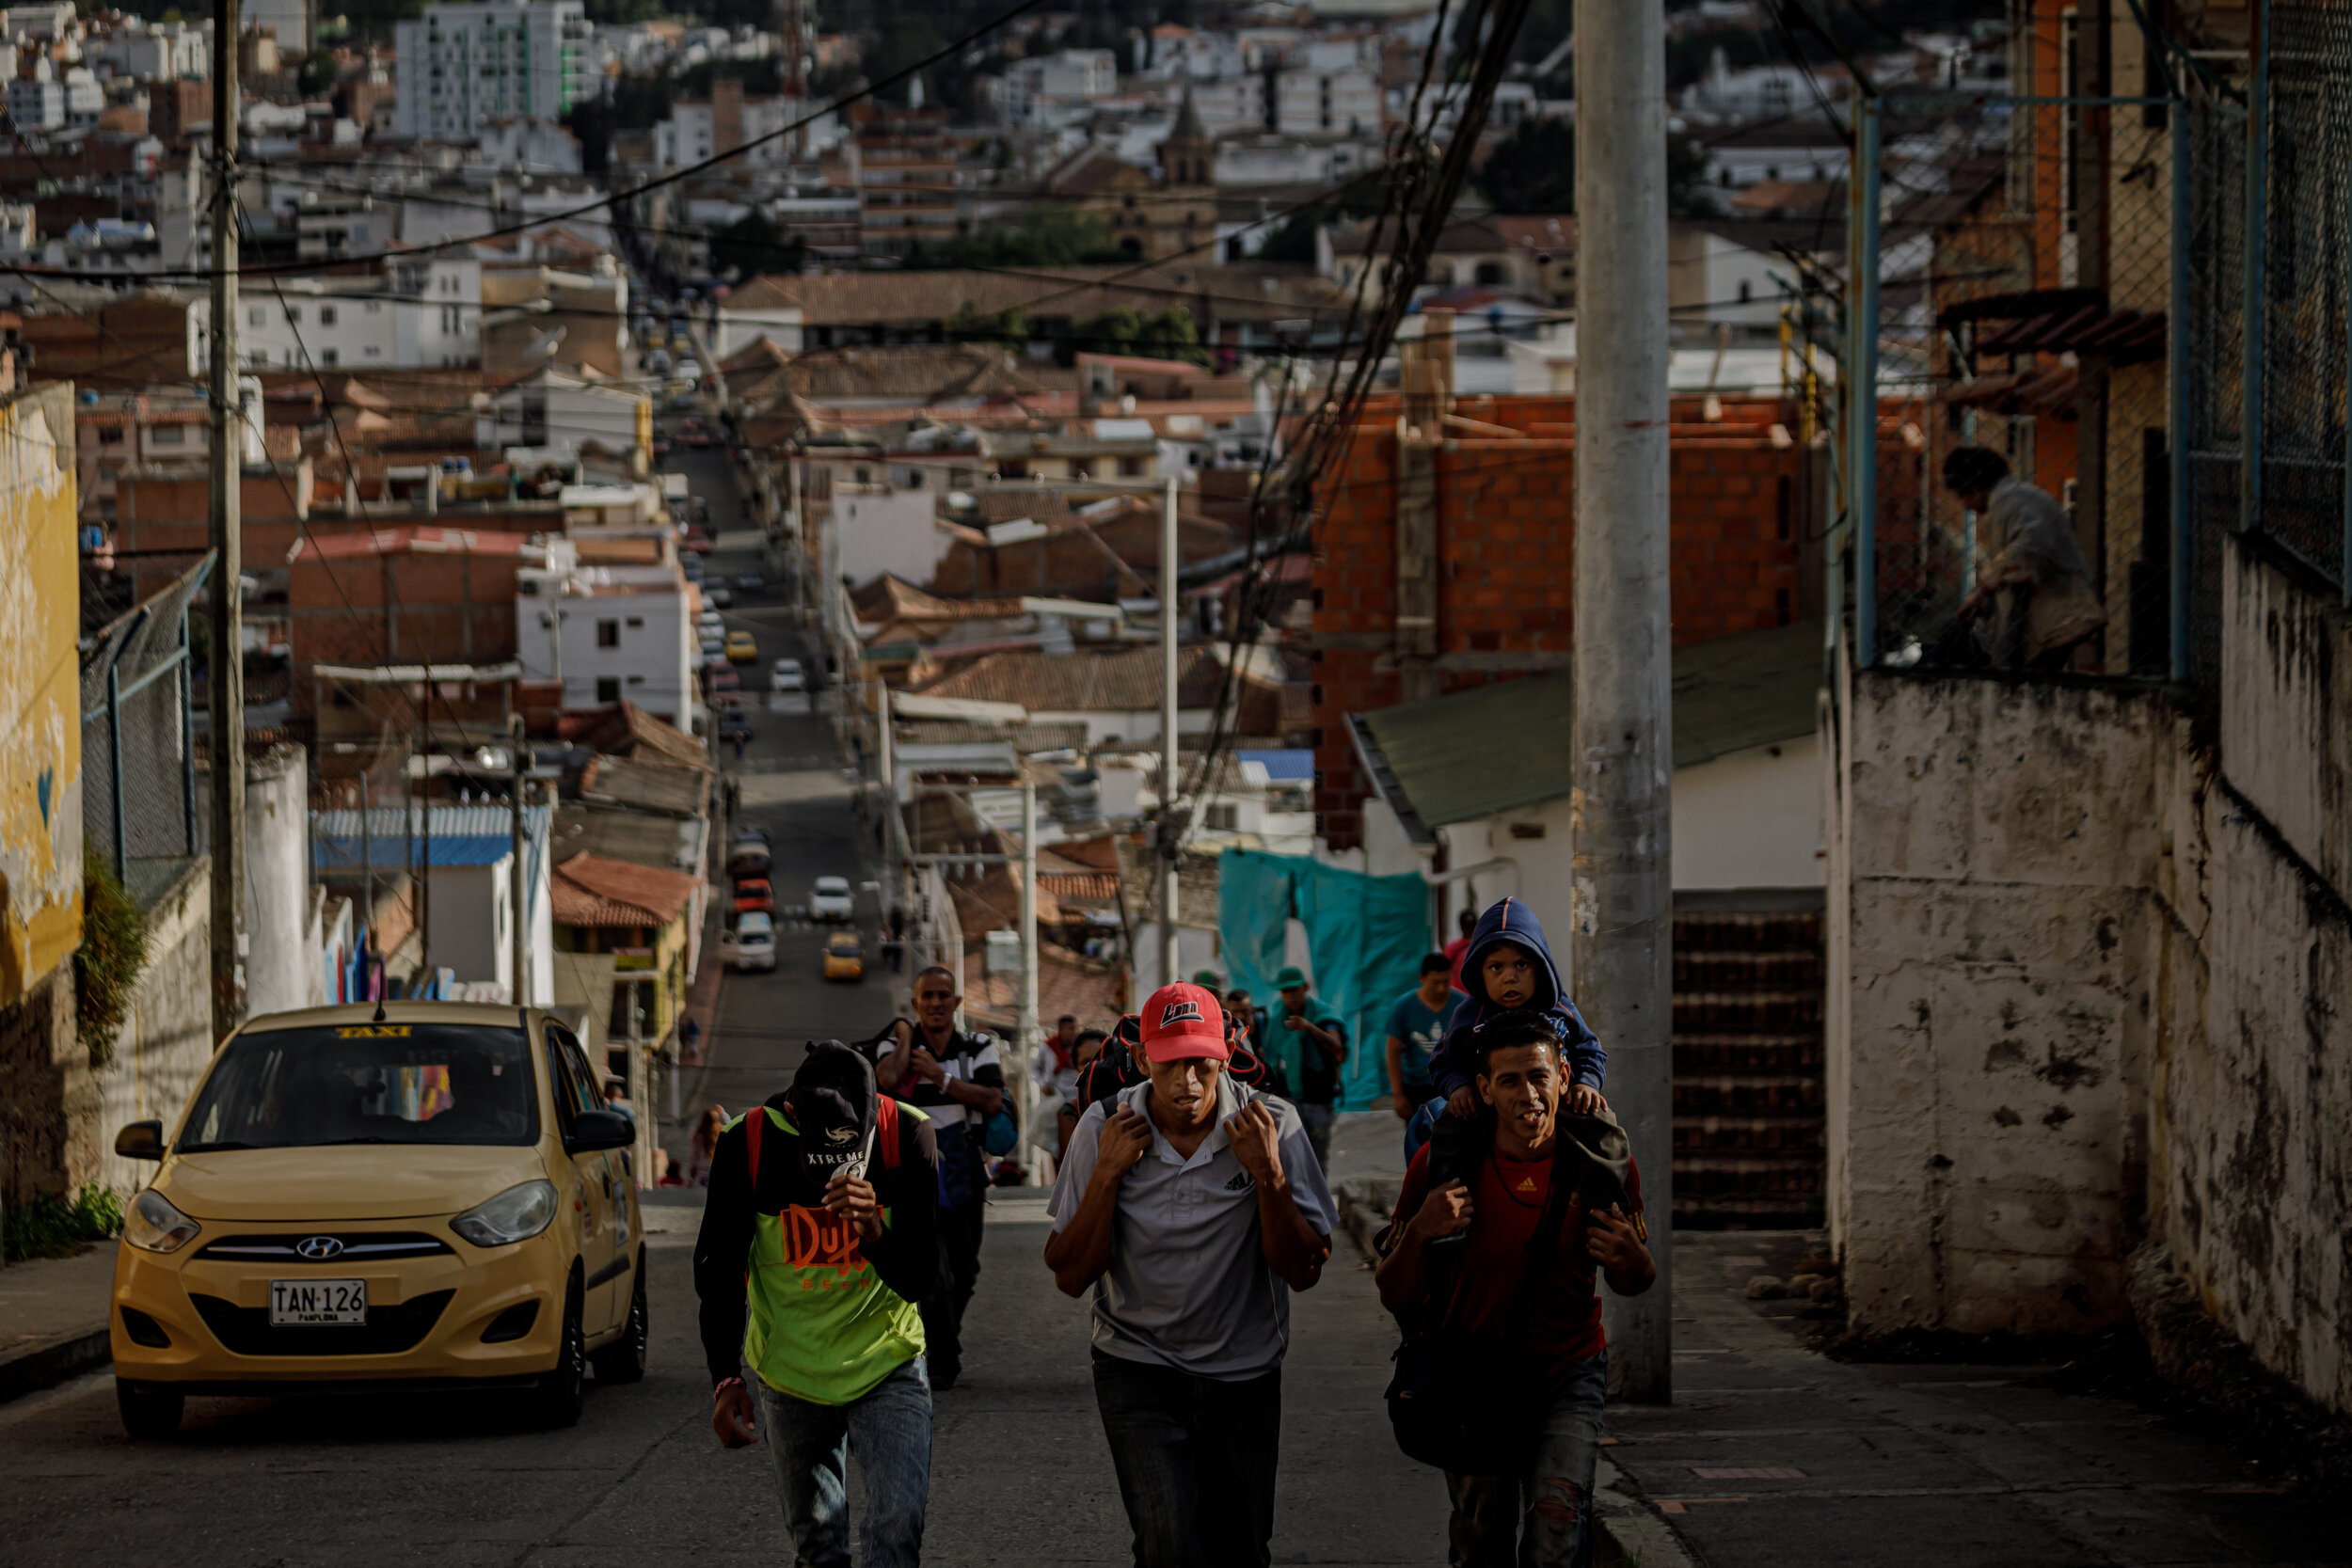  Venezuelan migrants make their way up a steep hill in Pamplona, Colombia. Each day an estimate of 5000 people flee Venezuela. They simply walk out. The most popular way out is through the Colombian border city of Ccuta. Then comes one of the most d